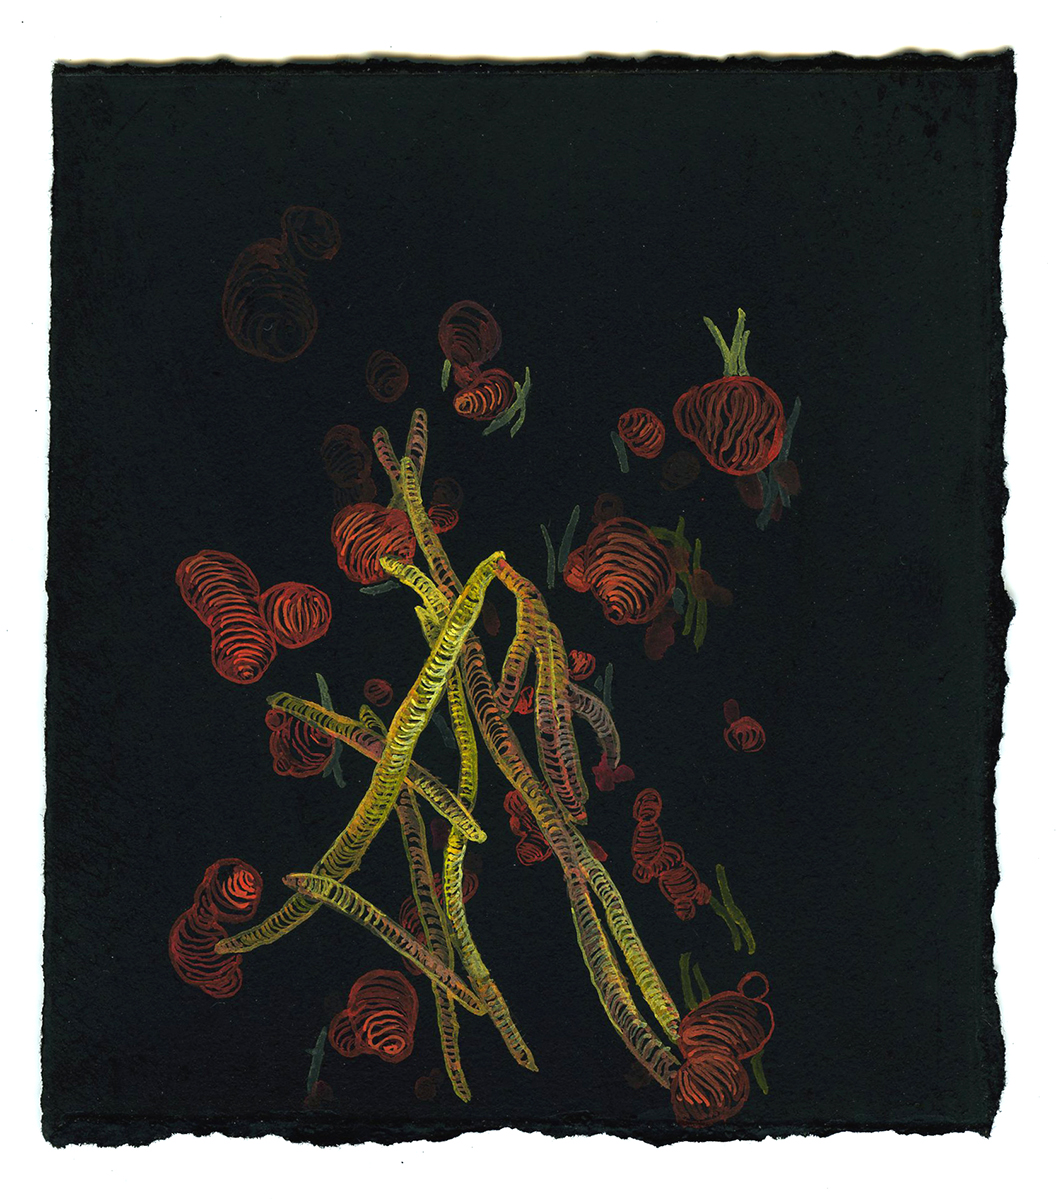 Protazoan Study # 2, 2007-08, pastel, gouache, and ink on paper, 4 x 4 1/2 inches